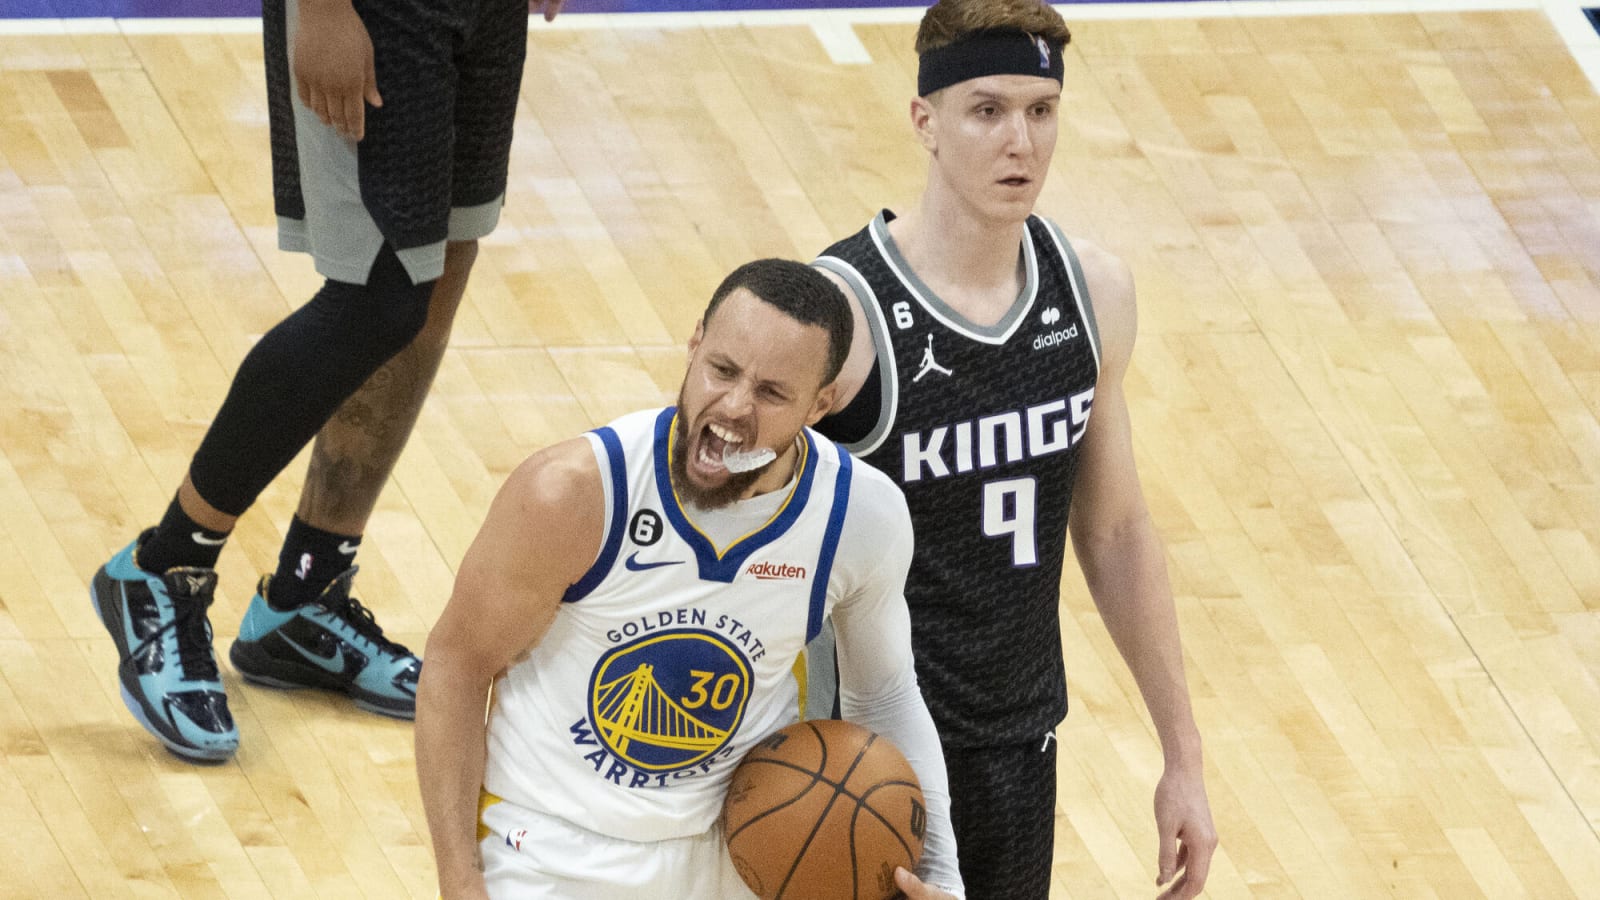 Steph Curry Erupts for 50, Warriors End Kings’ Wonderful Ride